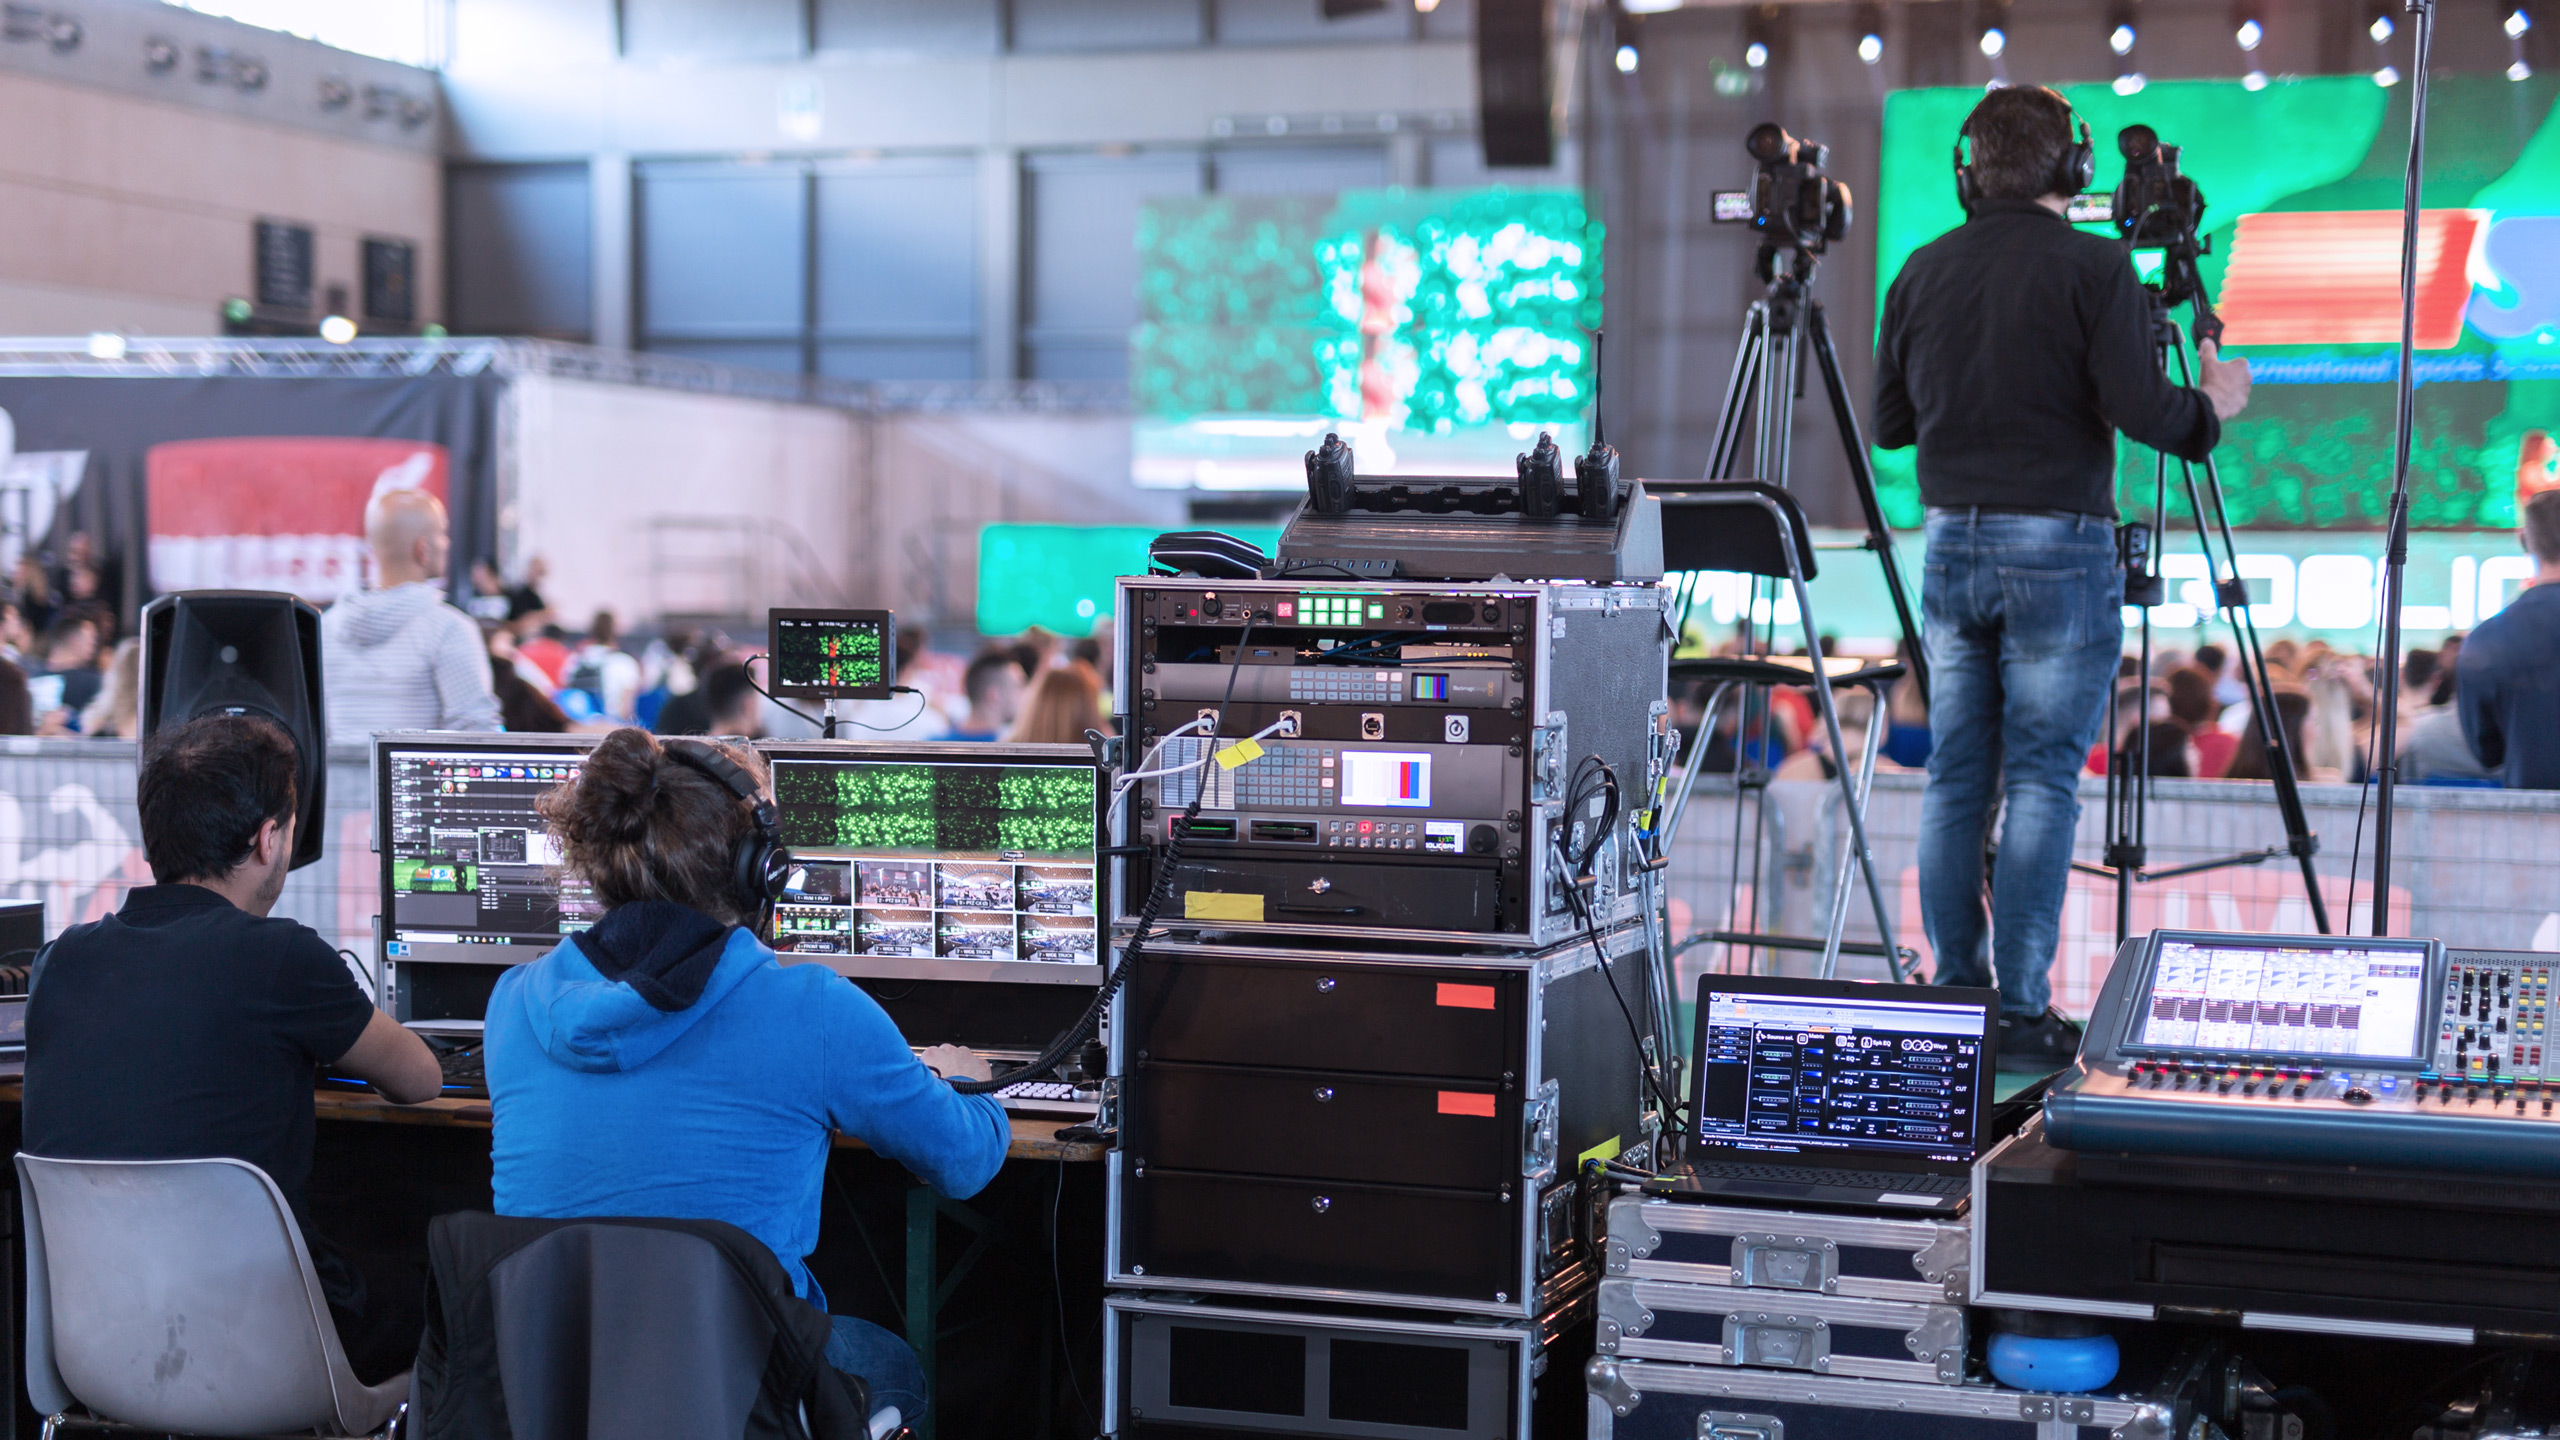 Two people operating broadcasting equipment at a live event, with screens showing the stage and audience, and a camera operator filming nearby.